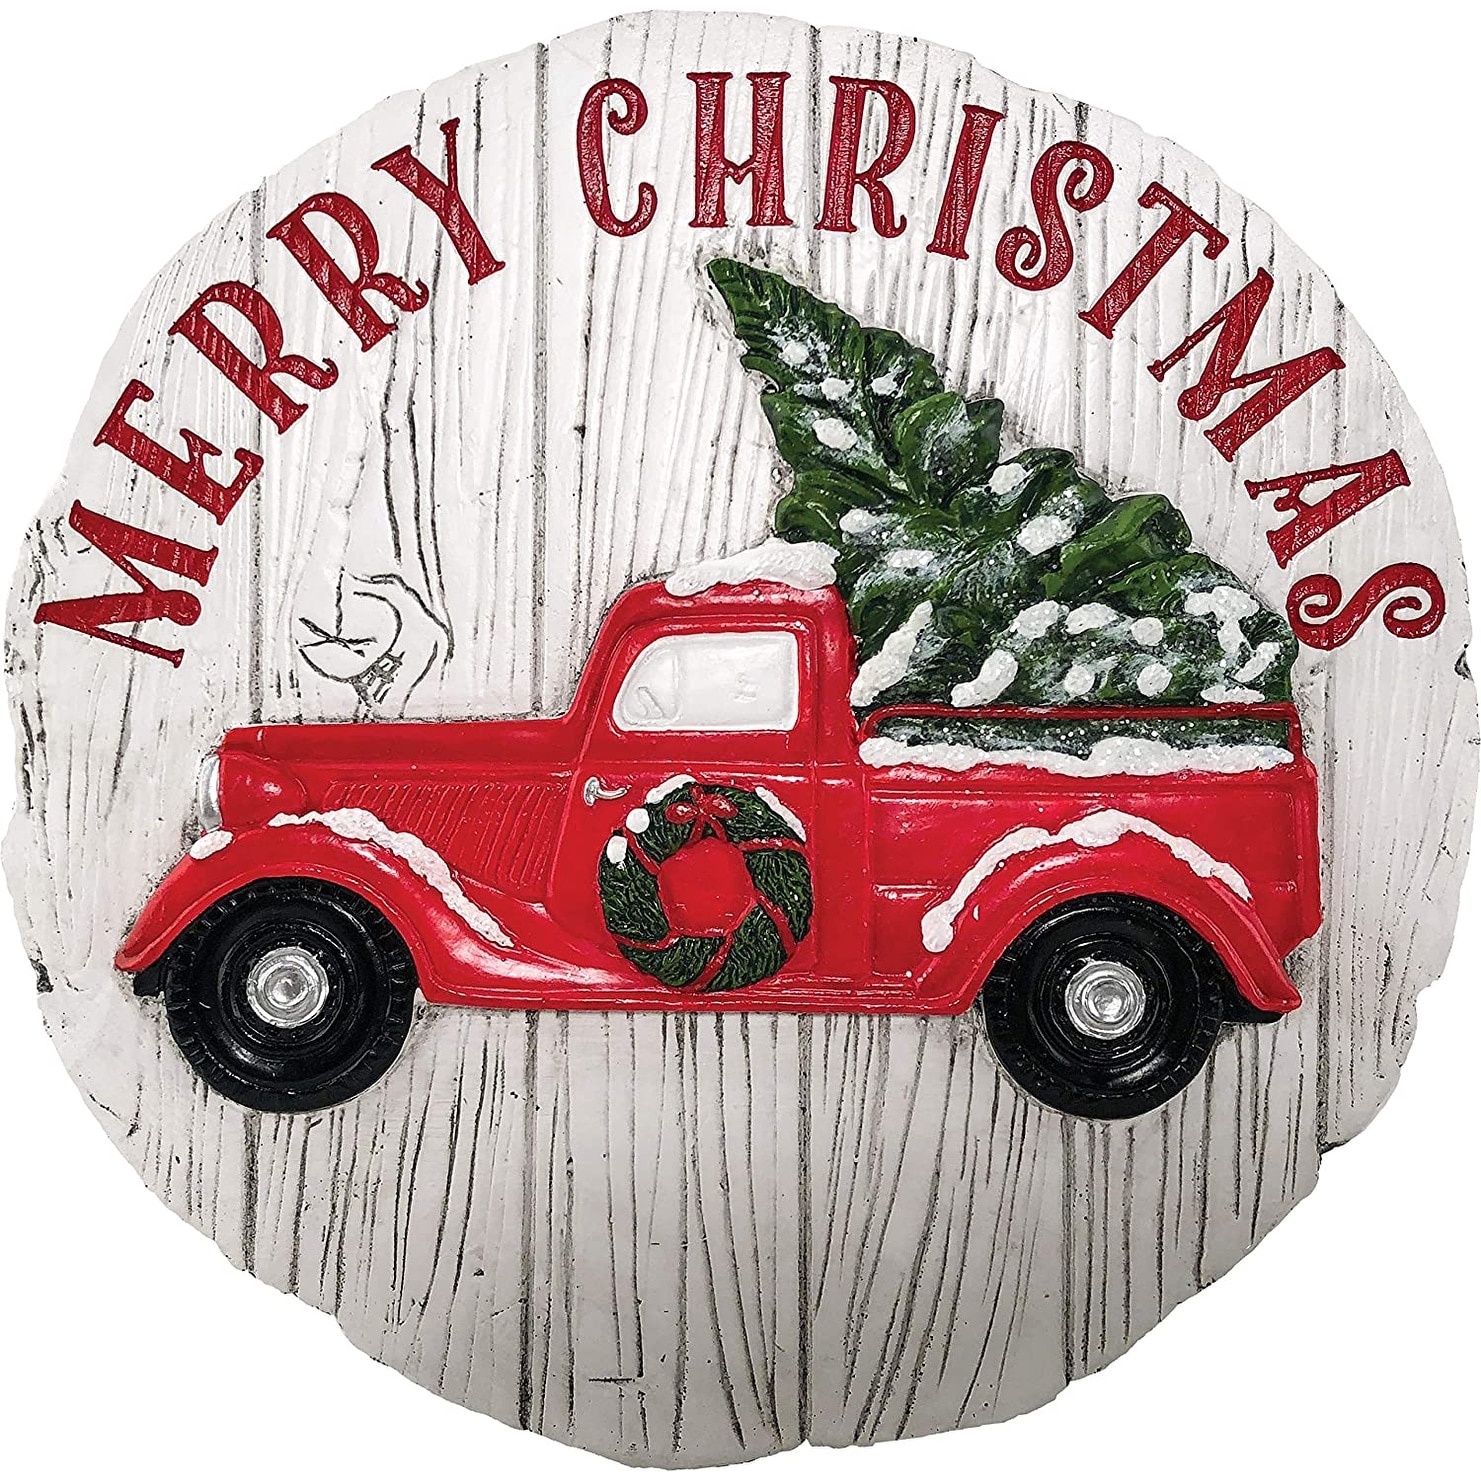 Merry Christmas Red Truck Decorative Garden Stone - Multi-Color